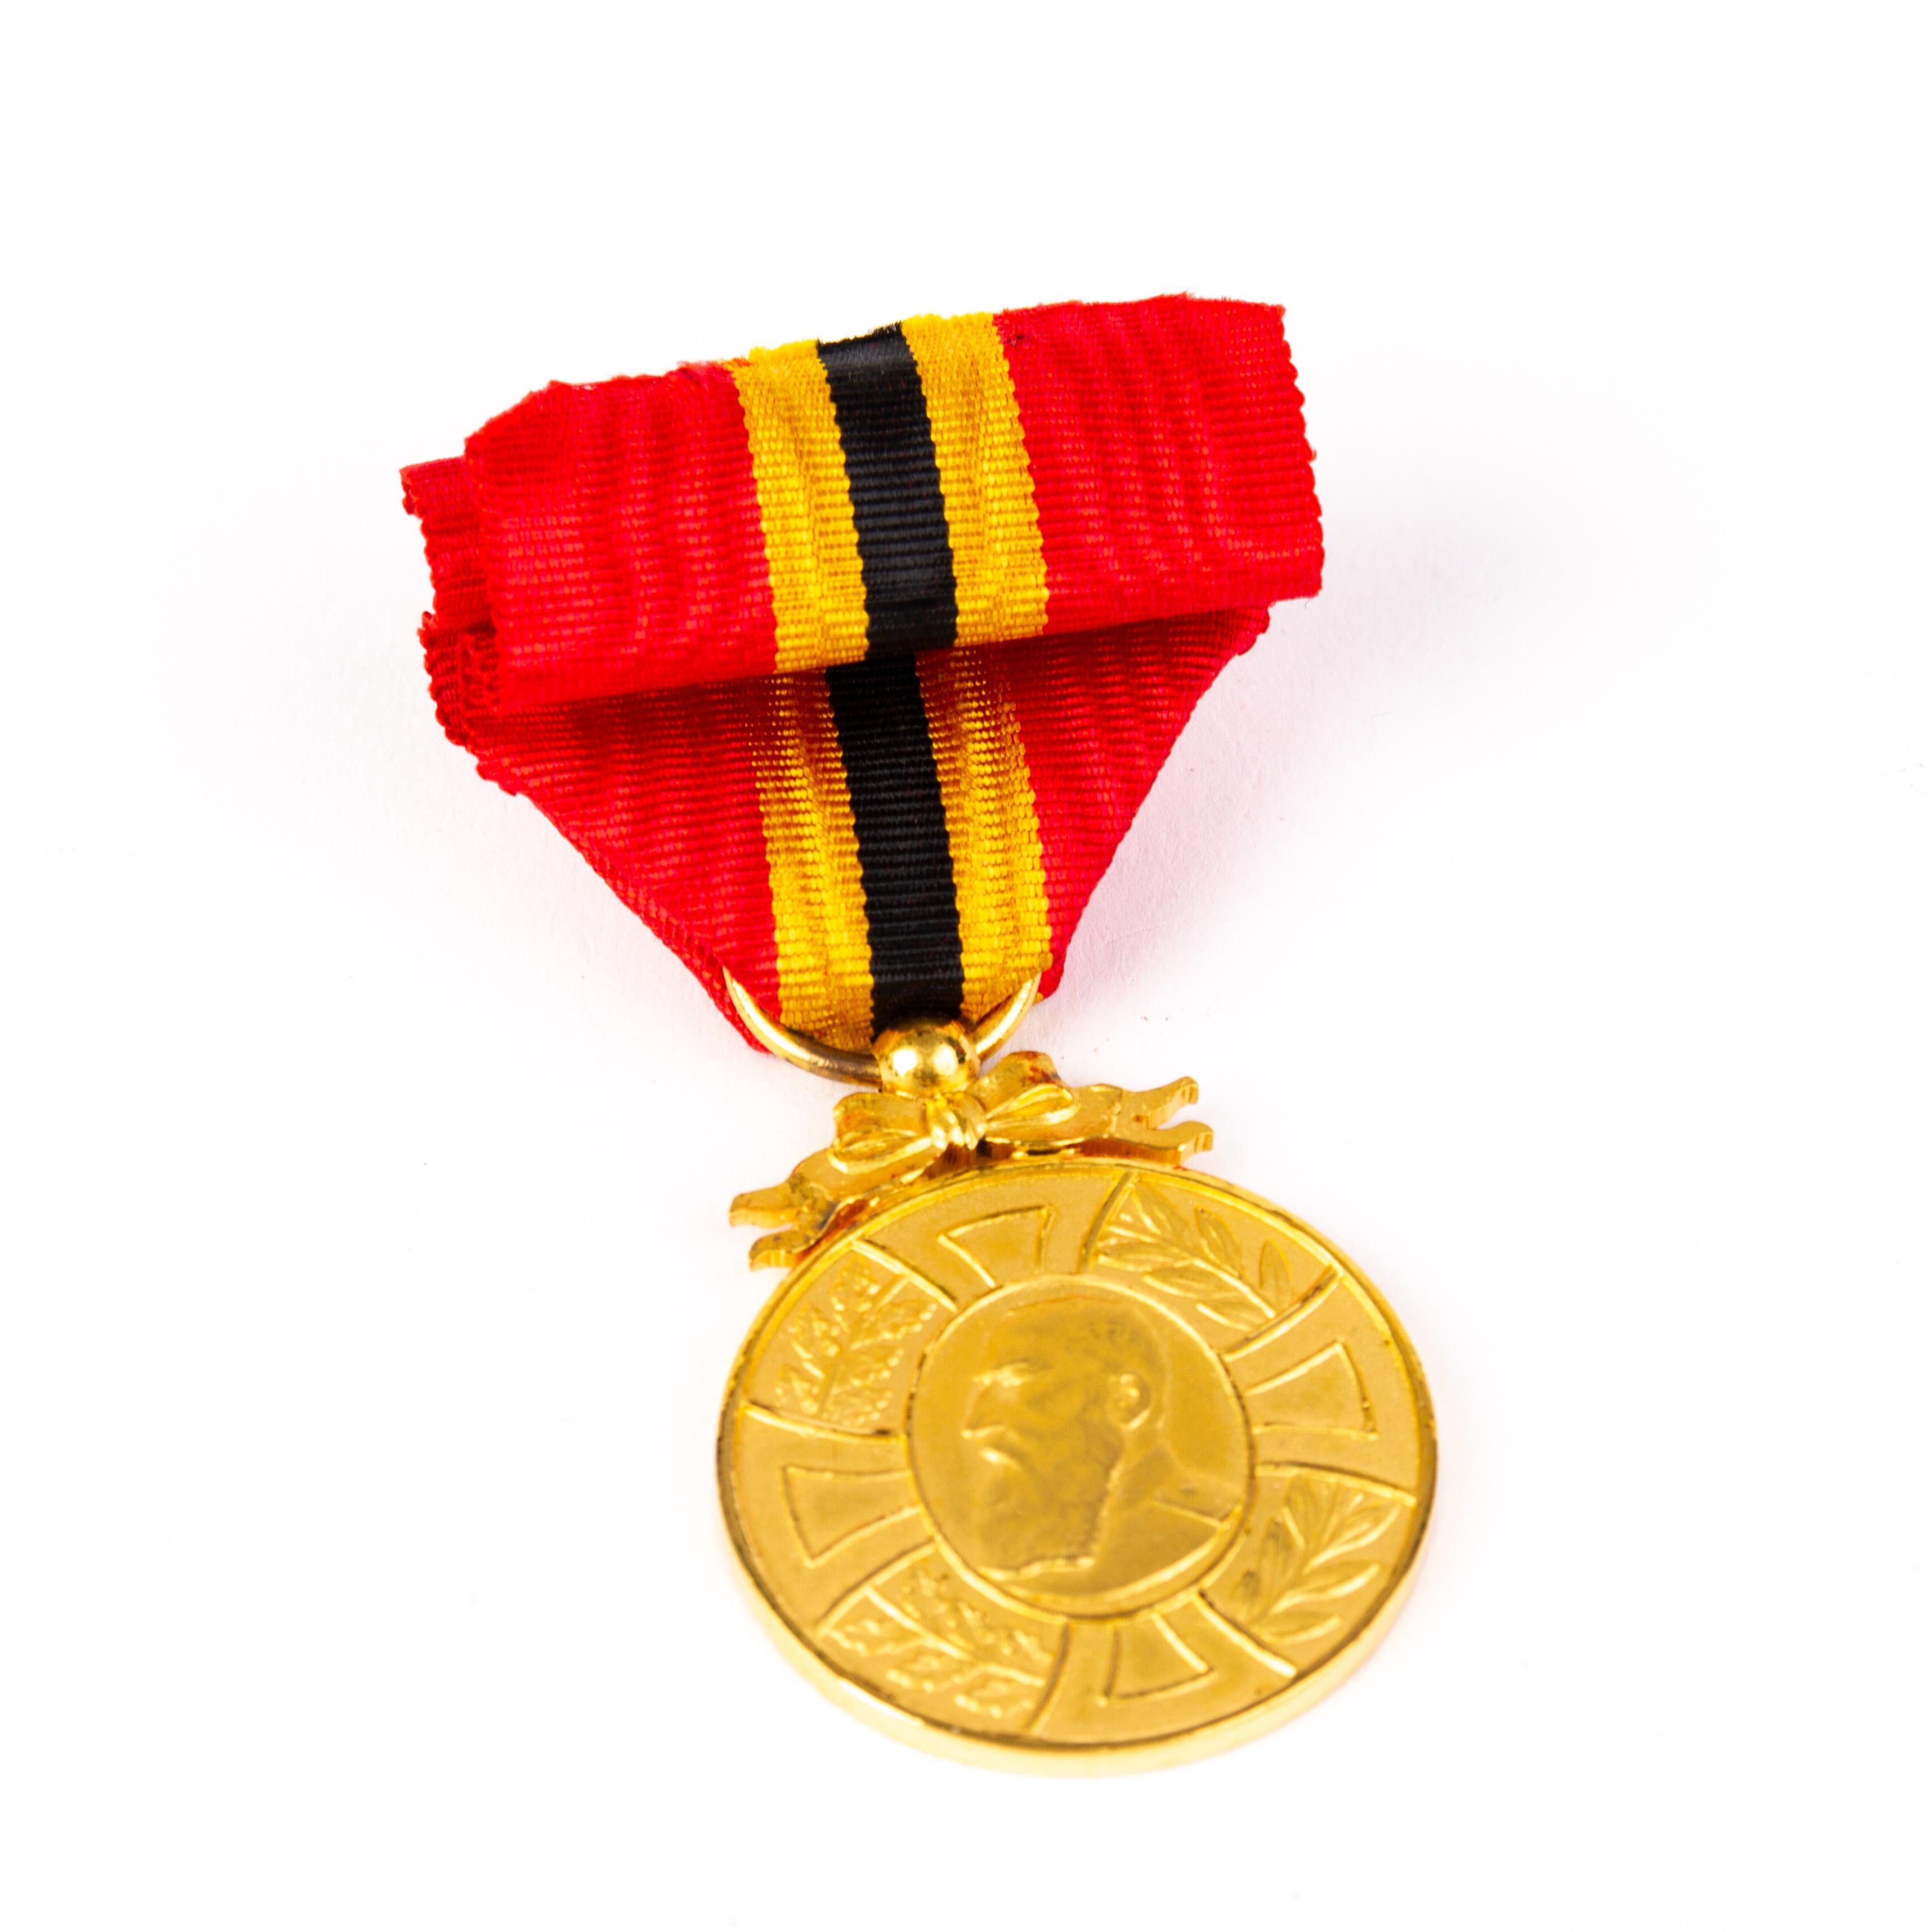 In good condition
From a private collection
Free international shipping
King Leopold II Belgian Medal 1865-1905